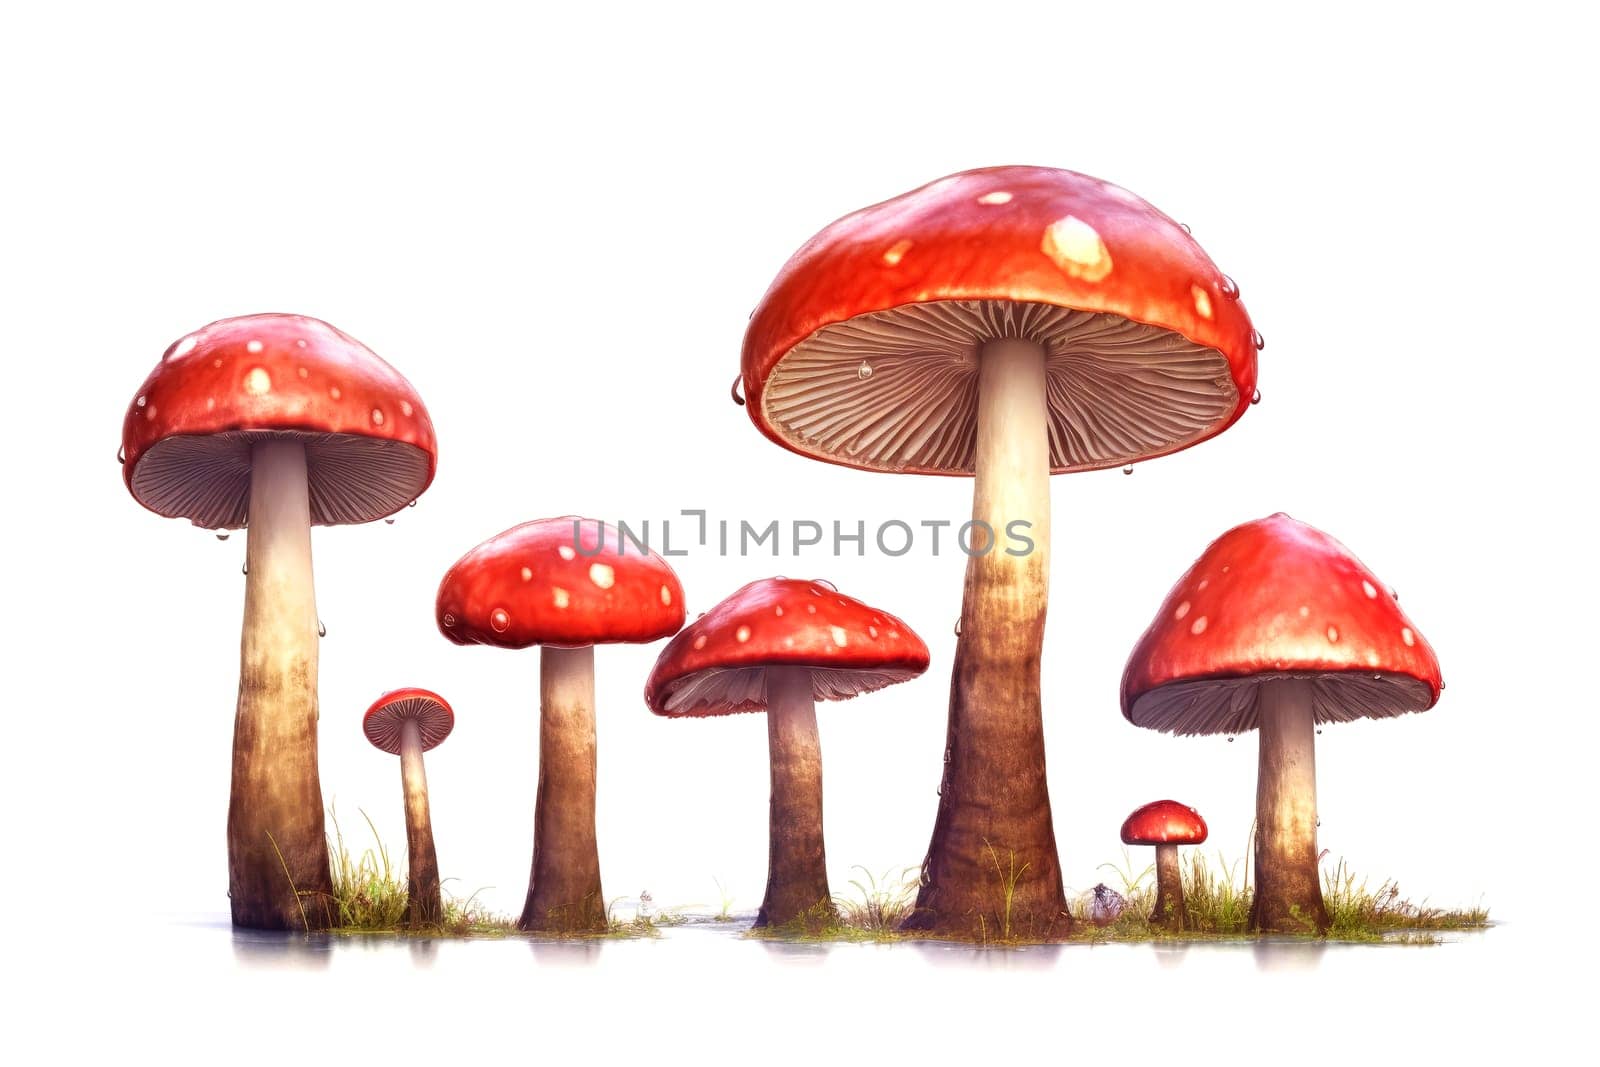 Cluster of red spotted mushrooms on a white background with green moss by andreyz